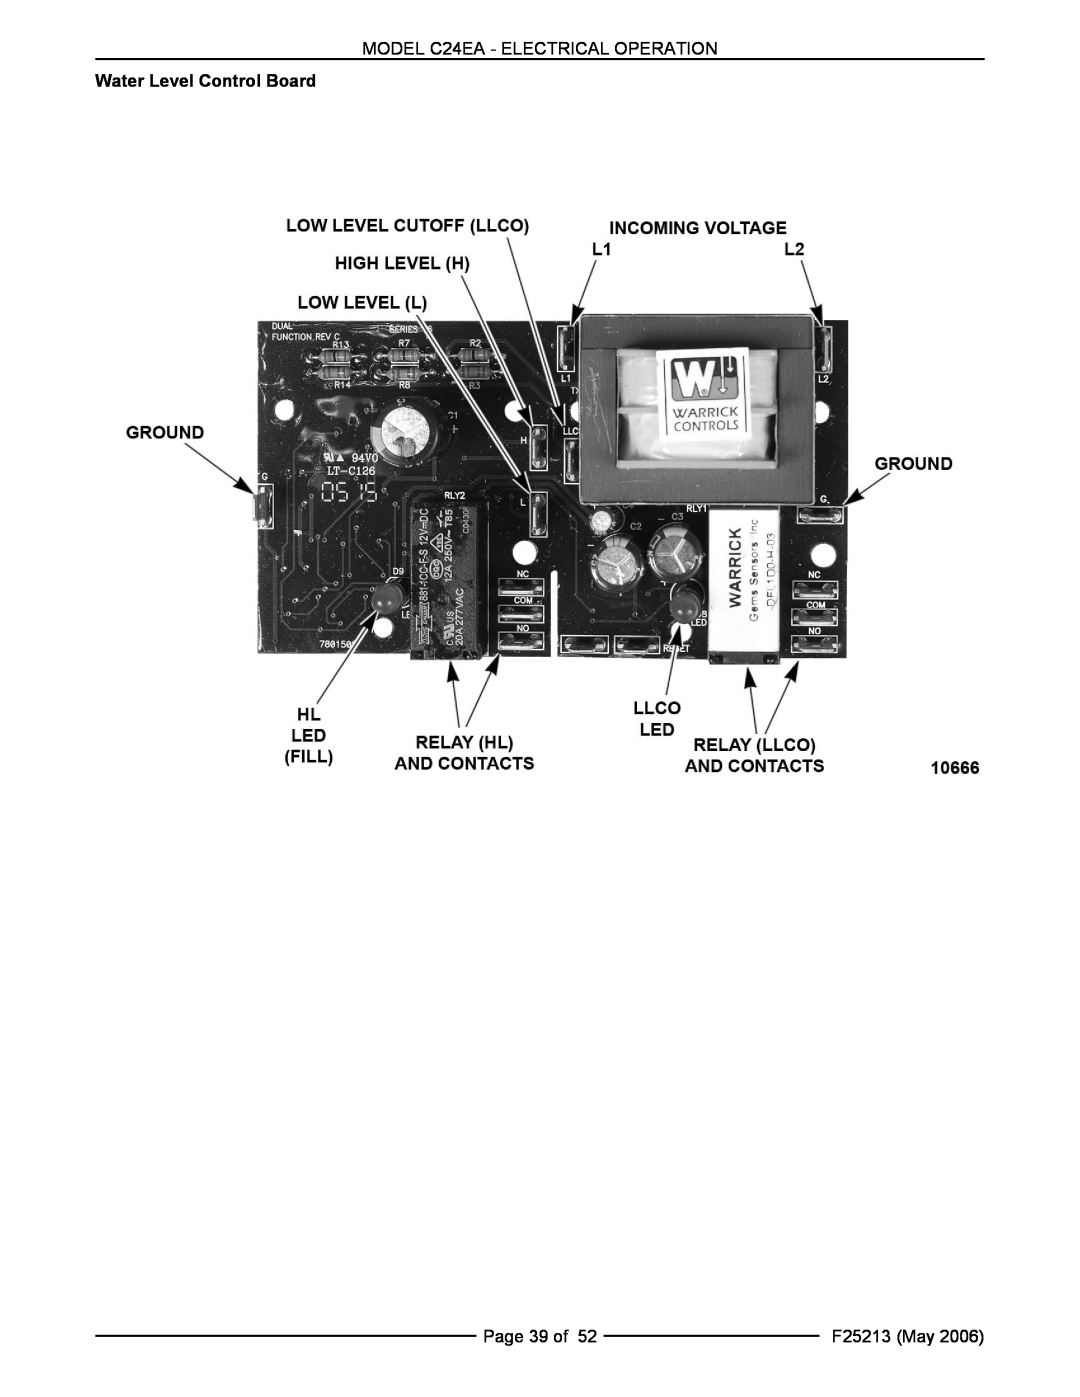 Vulcan-Hart C24EA5 208/240V BASIC MODEL C24EA - ELECTRICAL OPERATION, Water Level Control Board, Page 39 of, F25213 May 